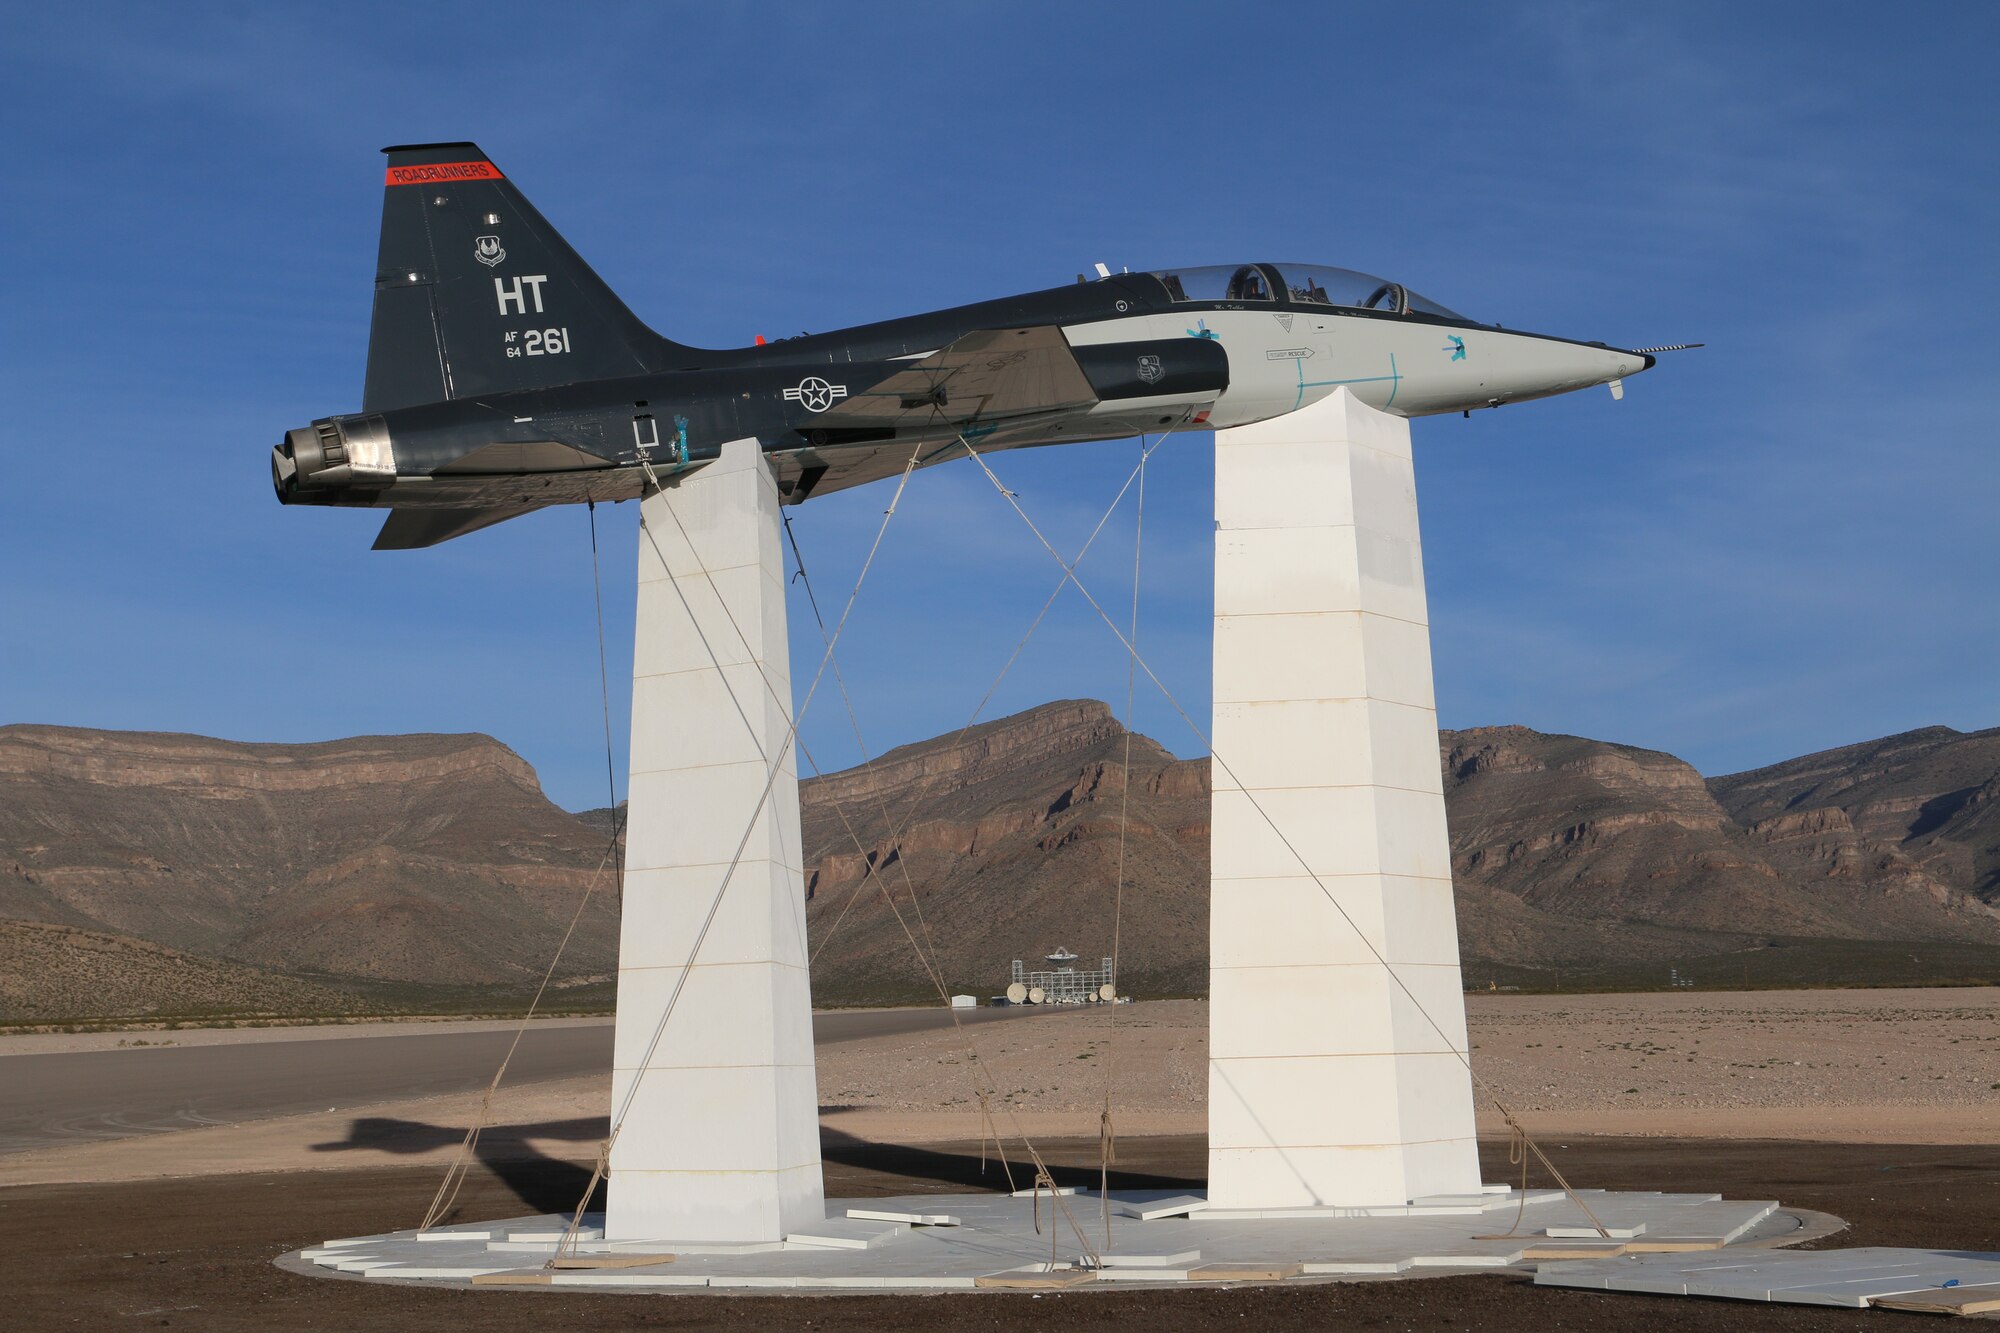 A T-38C is mounted to the large turntable for radar cross section testing using supports made from the previous type of foam used by the 704th Test Group, Detachment 1 at the National Radar Cross Section Test Facility at White Sands Missile Range in New Mexico in 2017. A new, sturdier type of foam now being used by the Detachment will allow the supports to be much smaller and cause less contamination in the data. (U.S. Air Force photo)